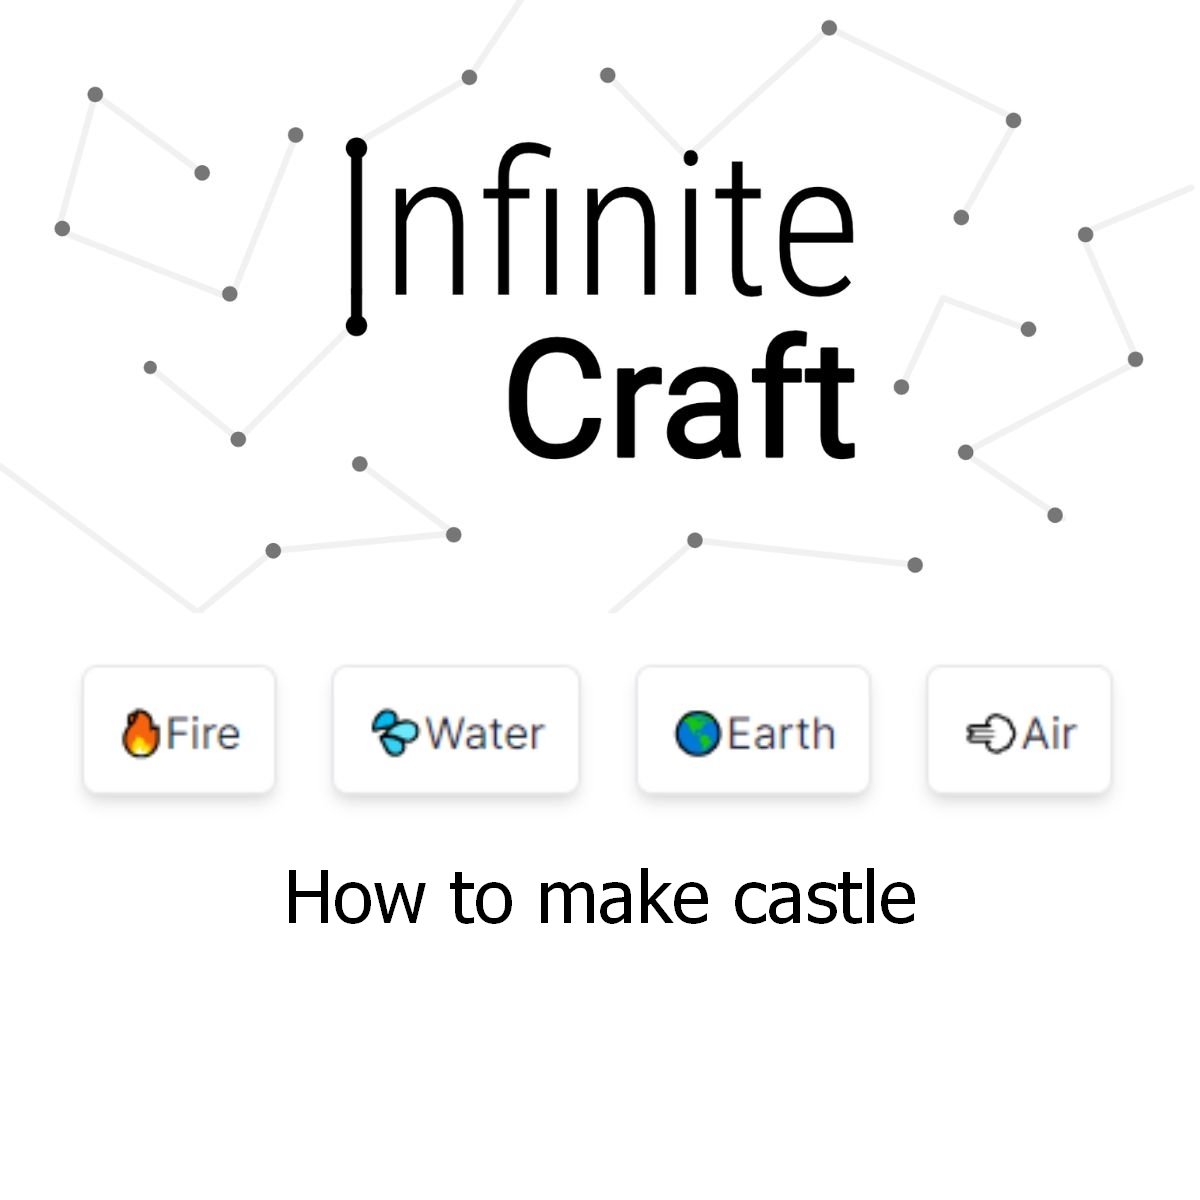 how to make castle in infinite craft